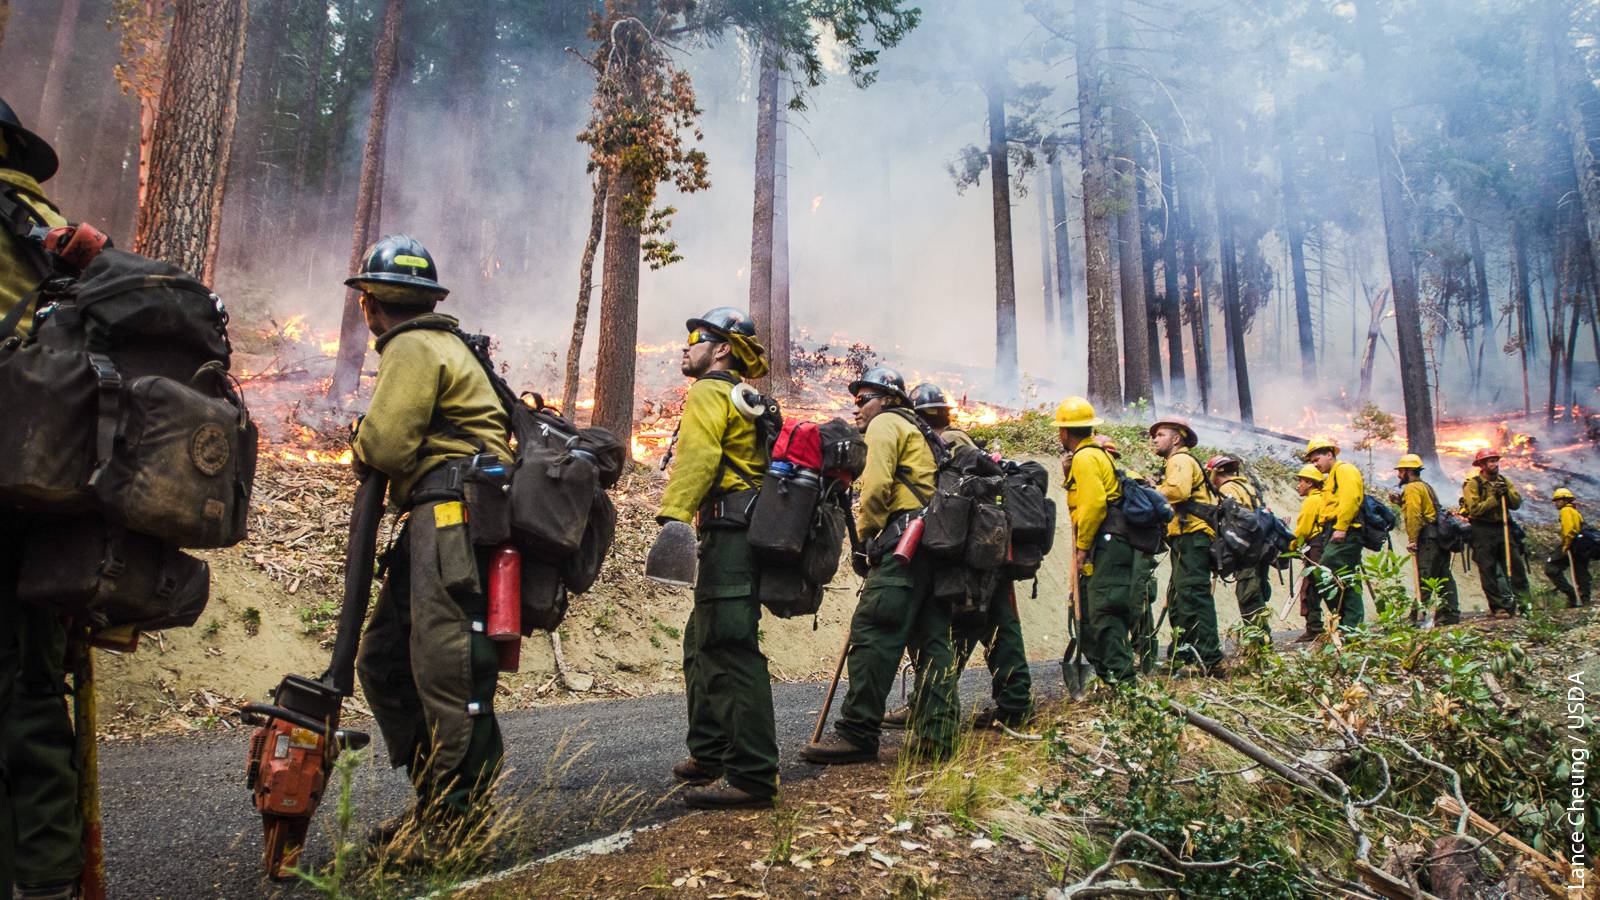 An interagency crew conducts a prescribed burn to help stop the Big Windy Complex Wildlands fire near Galice, Oregon, in 2013. In California, annual federal and state spending on wildfire suppression typically exceeds $1 billion.